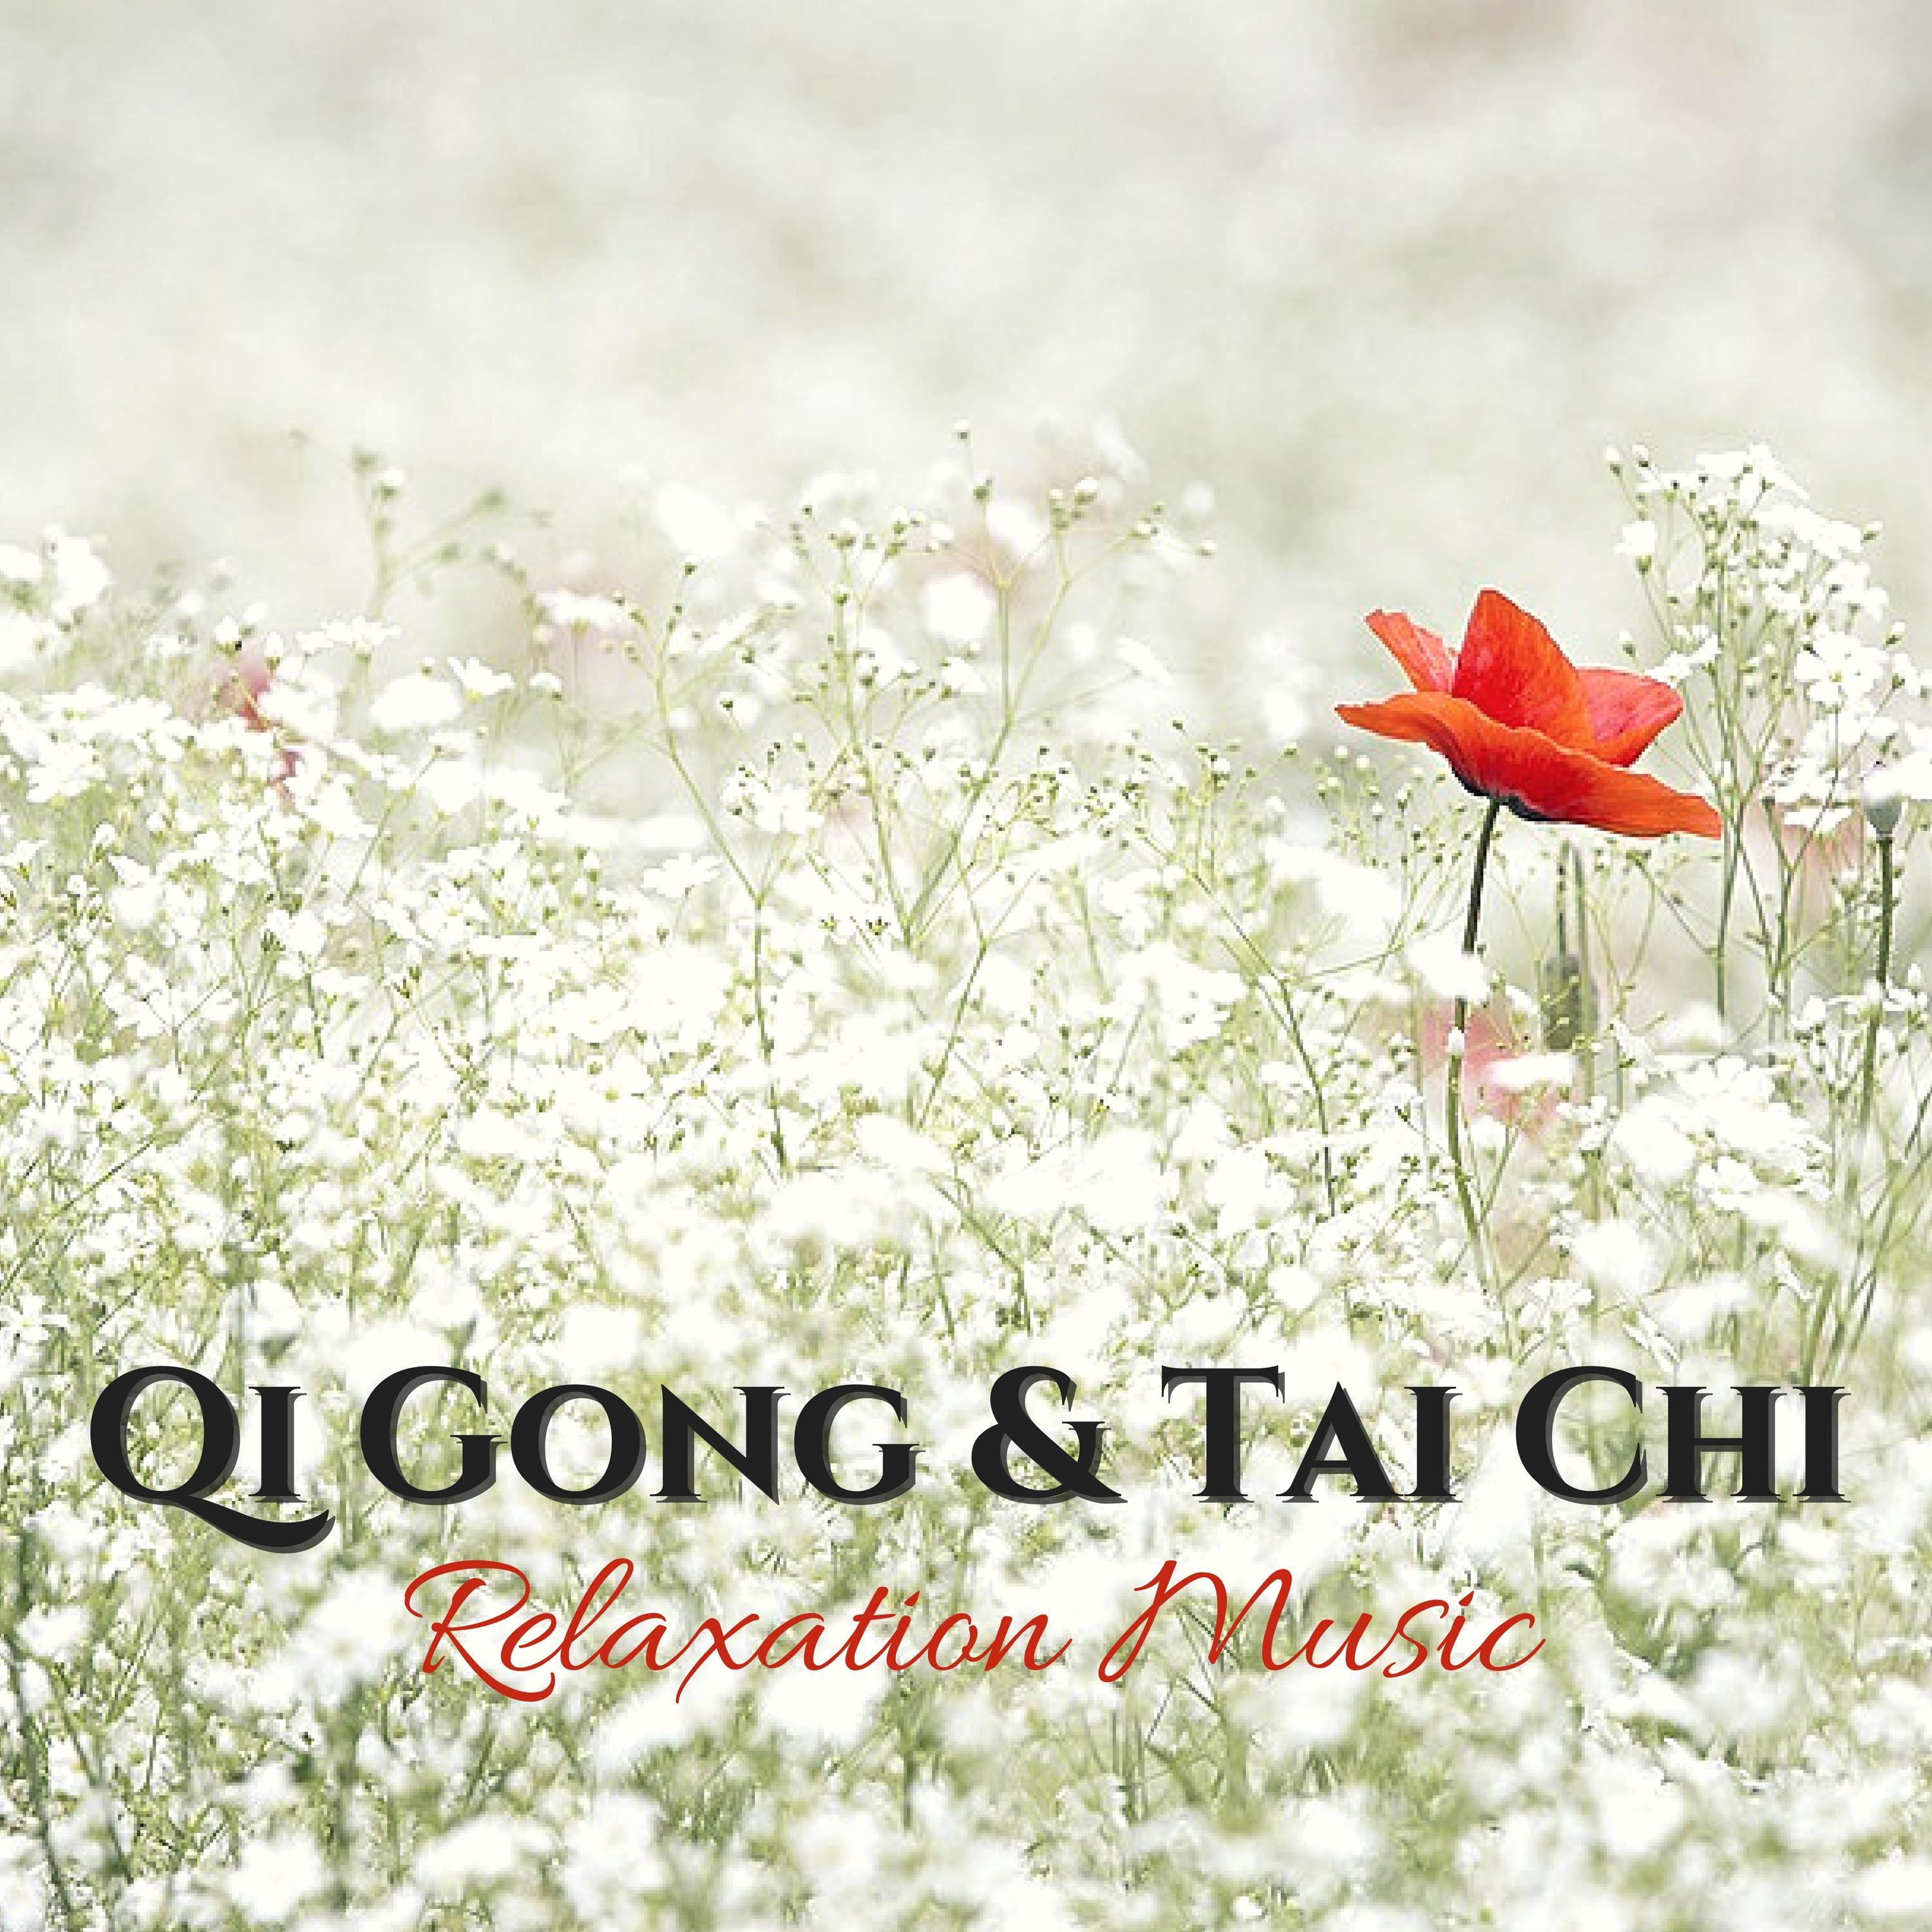 Qi Gong & Tai Chi Relaxation Music - Raise Vitality Levels and Relax Deeply with Instrumental Music